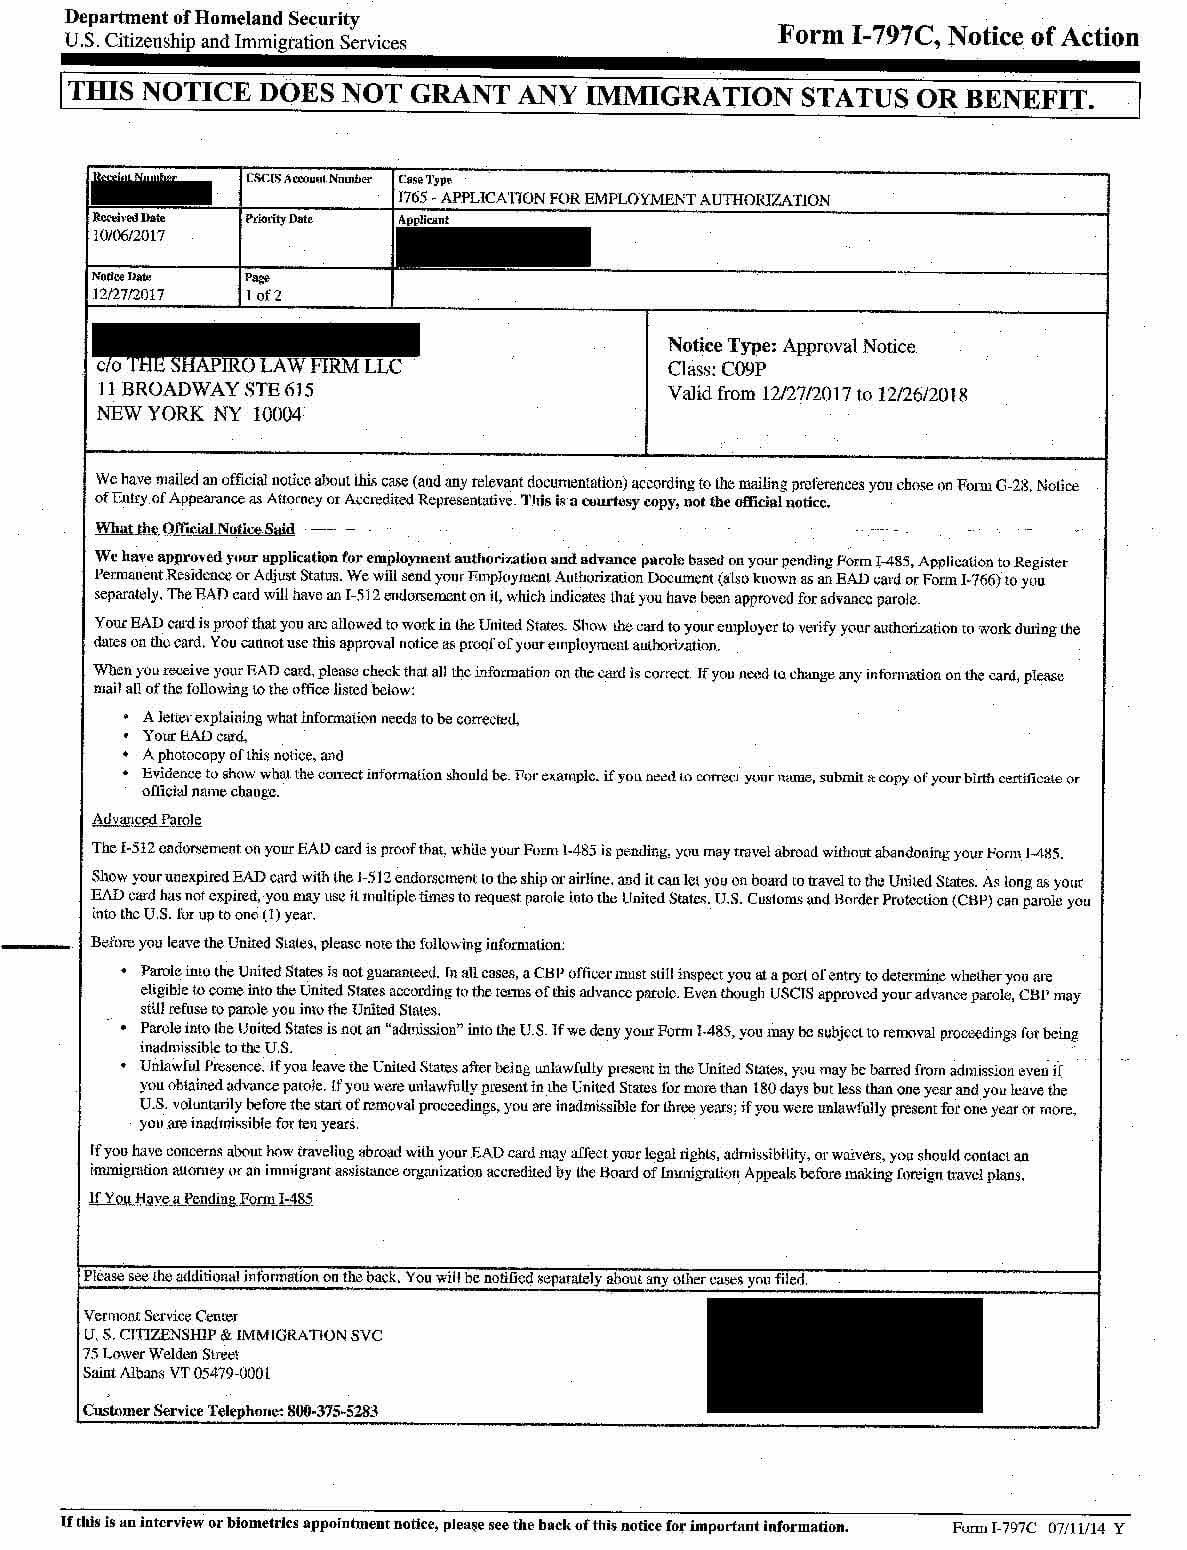 Form I-797C, I-765- Applicant for Employment Authorization, Approval Notice